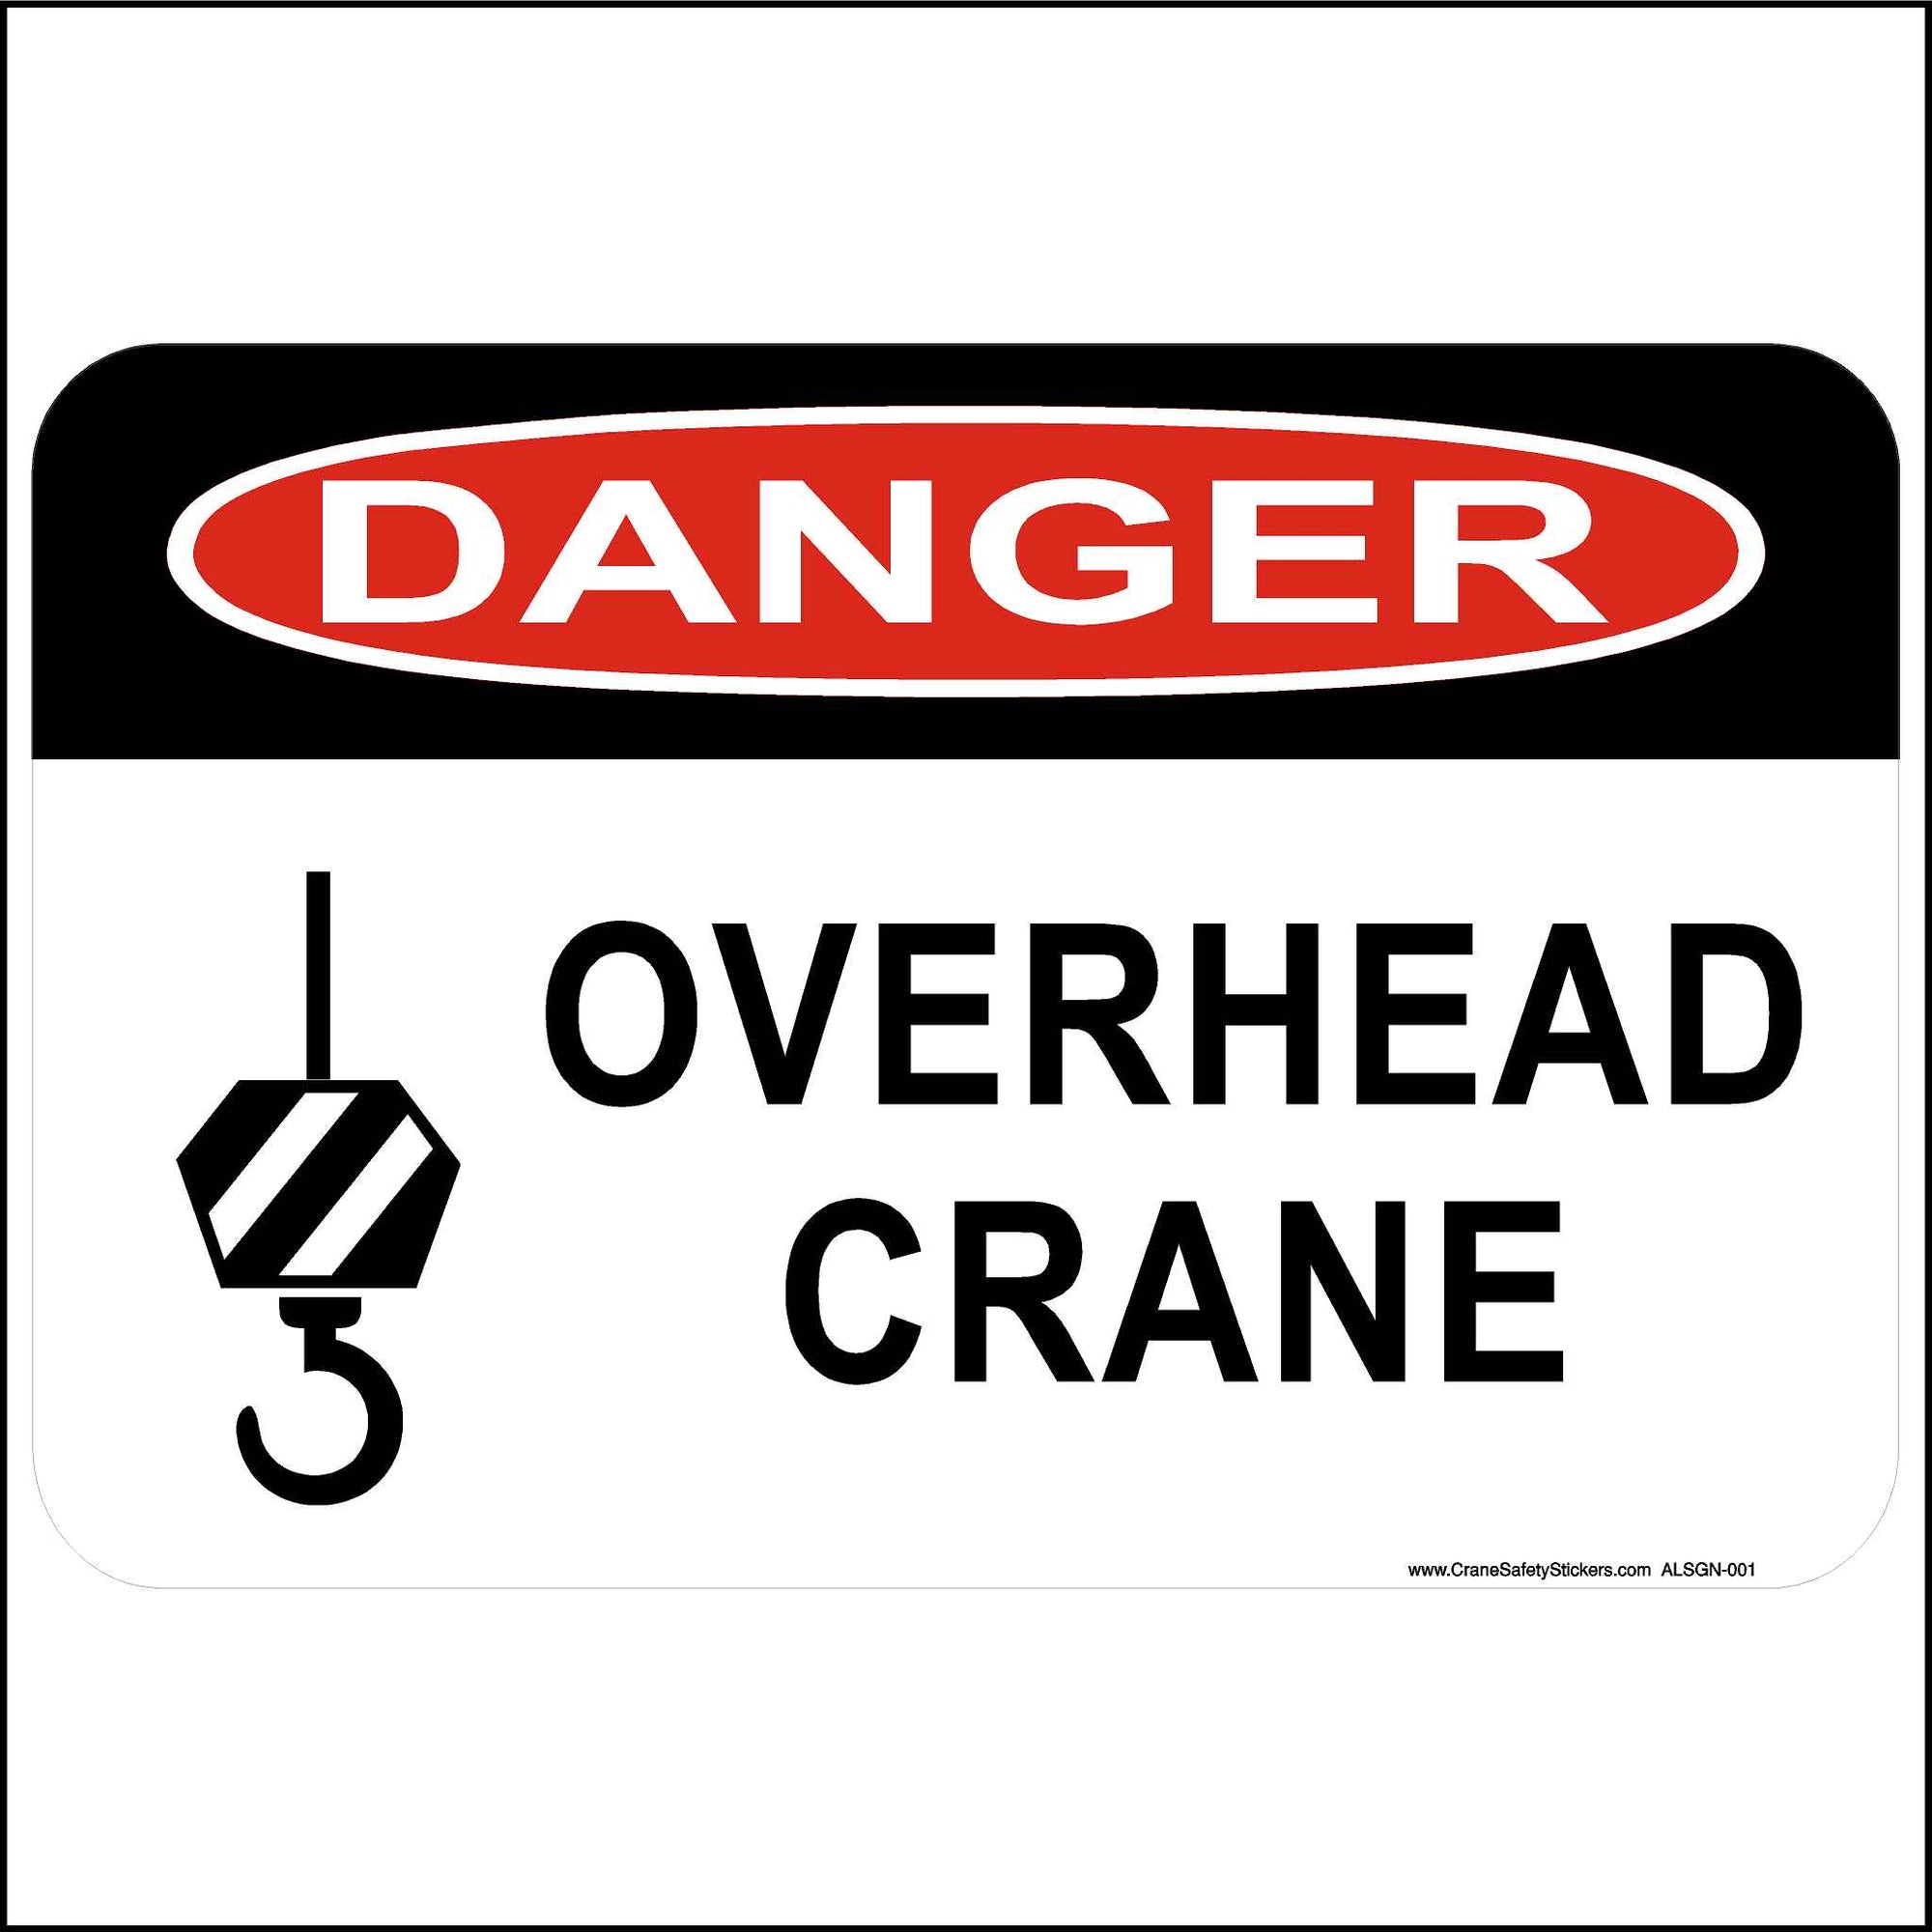 Crane Safety Sign Printed with, Danger Overhead Crane.